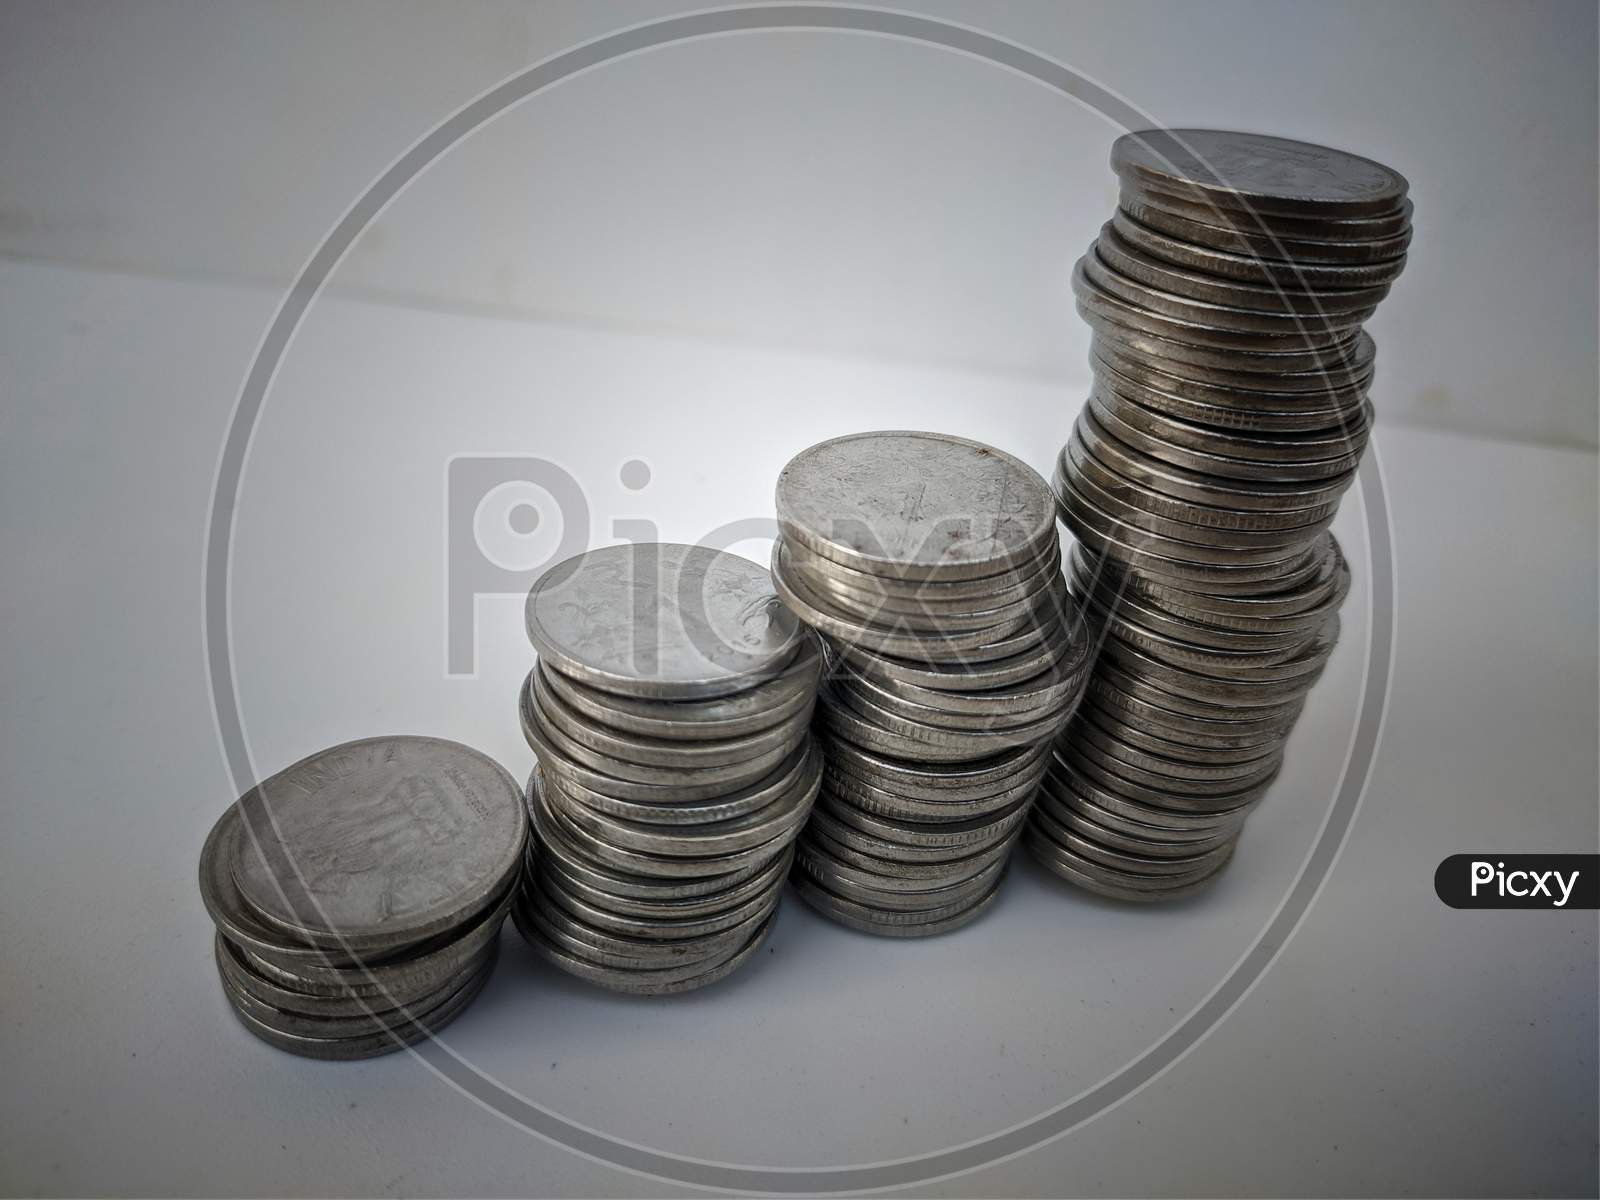 this is a picture of coins on white background.this is a collection of old coins.